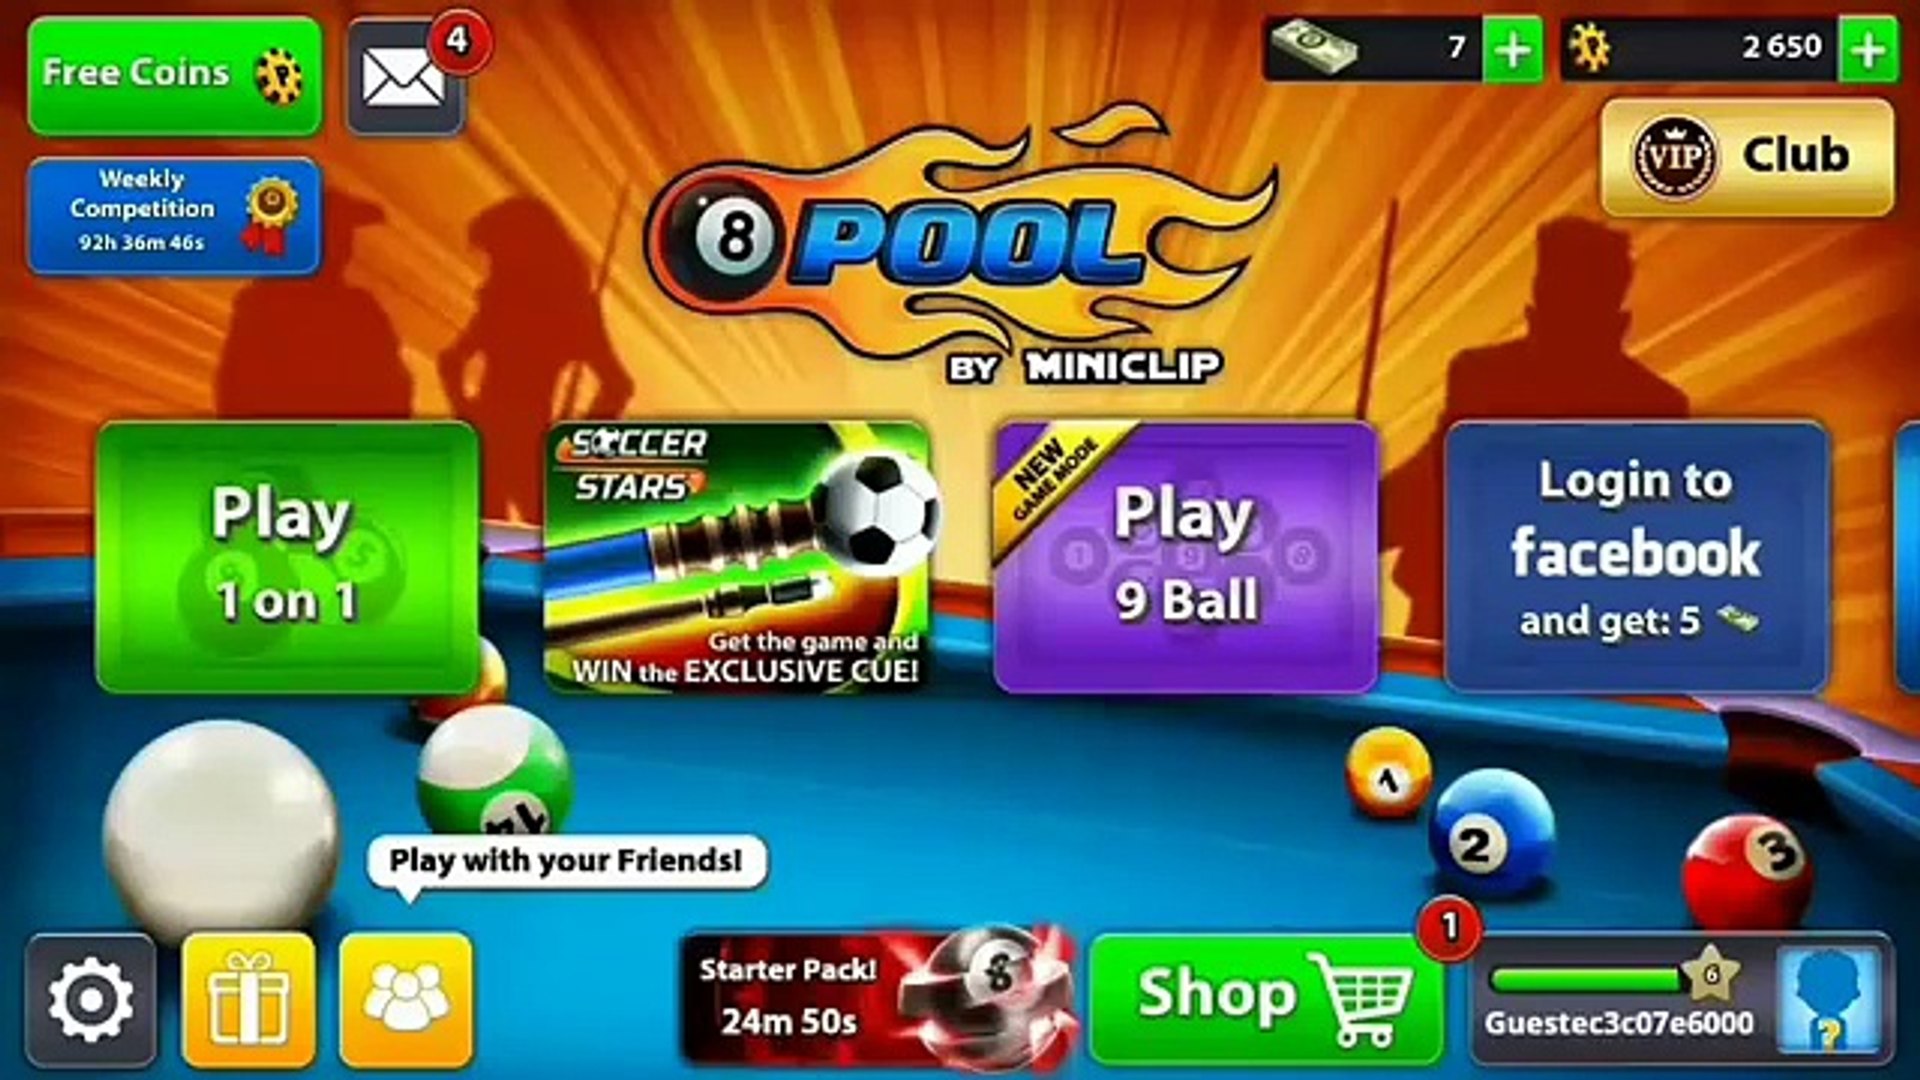 HOW TO POT 9 BALL FROM THE BREAK!! (9 BALL POOL) - - 